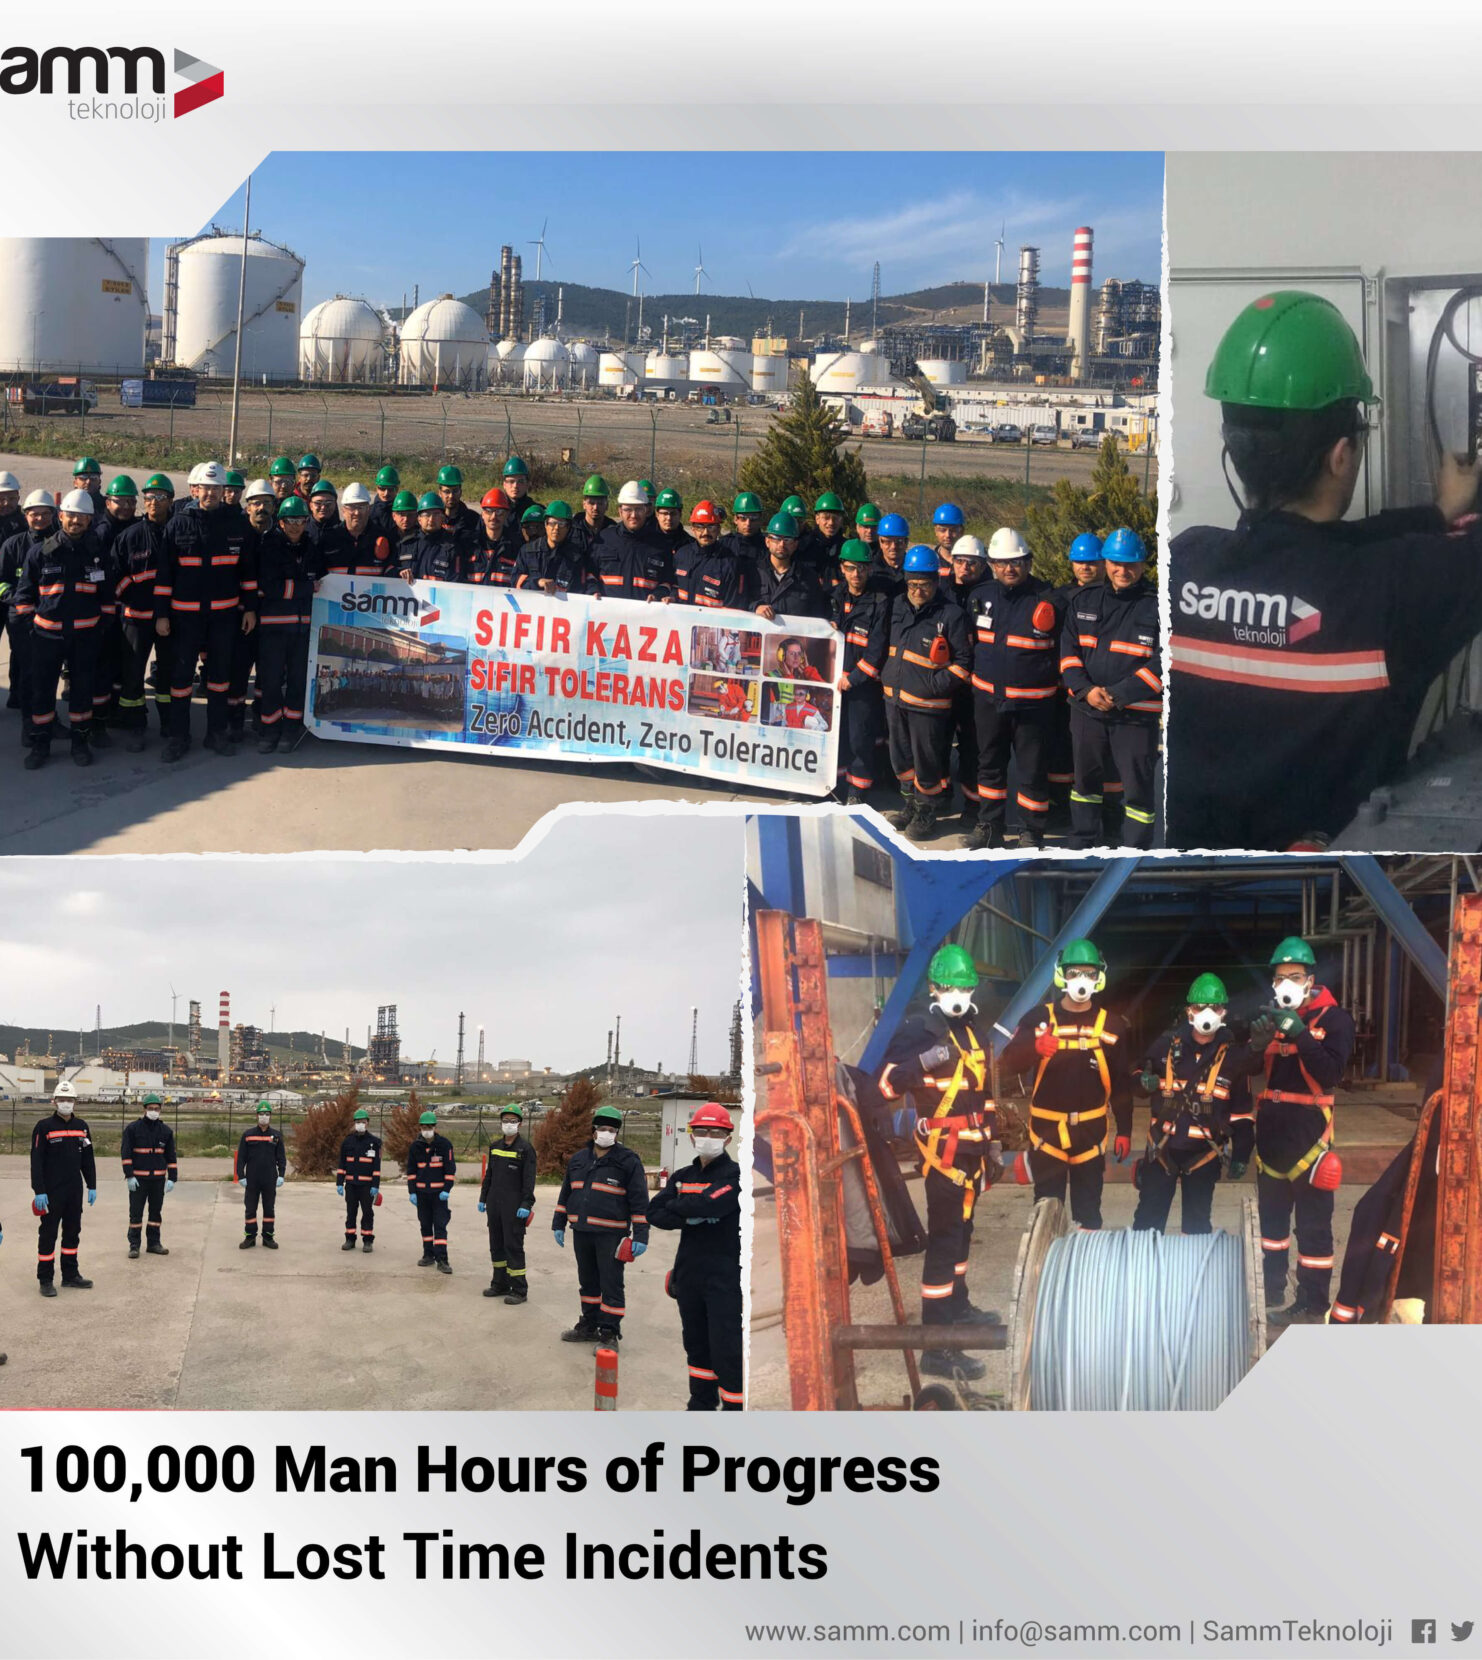 100,000 Man Hours of Progress Without Lost Time Incidents